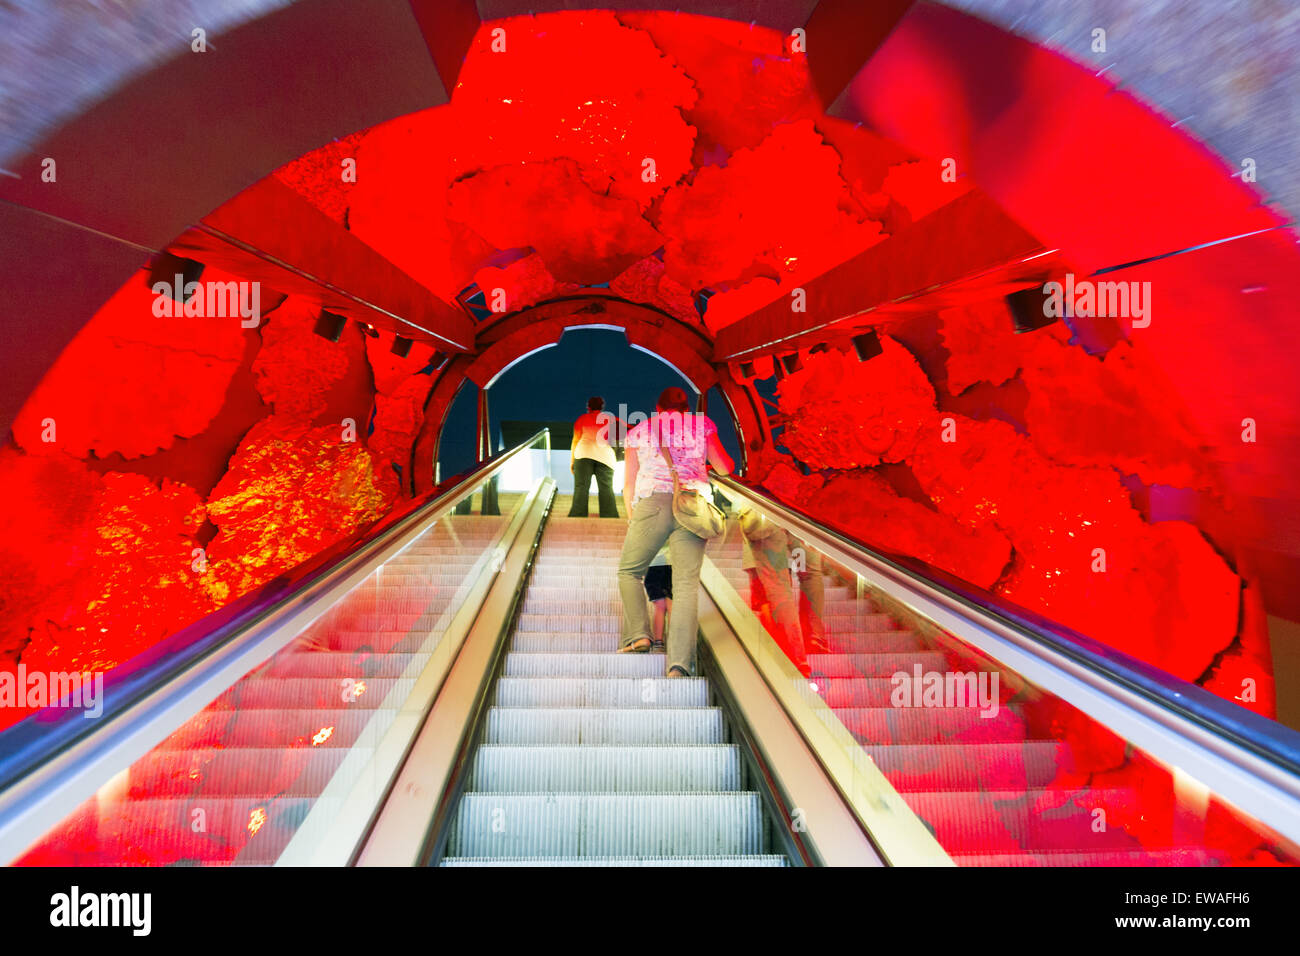 Escalator in the Science Museum, resembling an entry into a glowing planet. Stock Photo